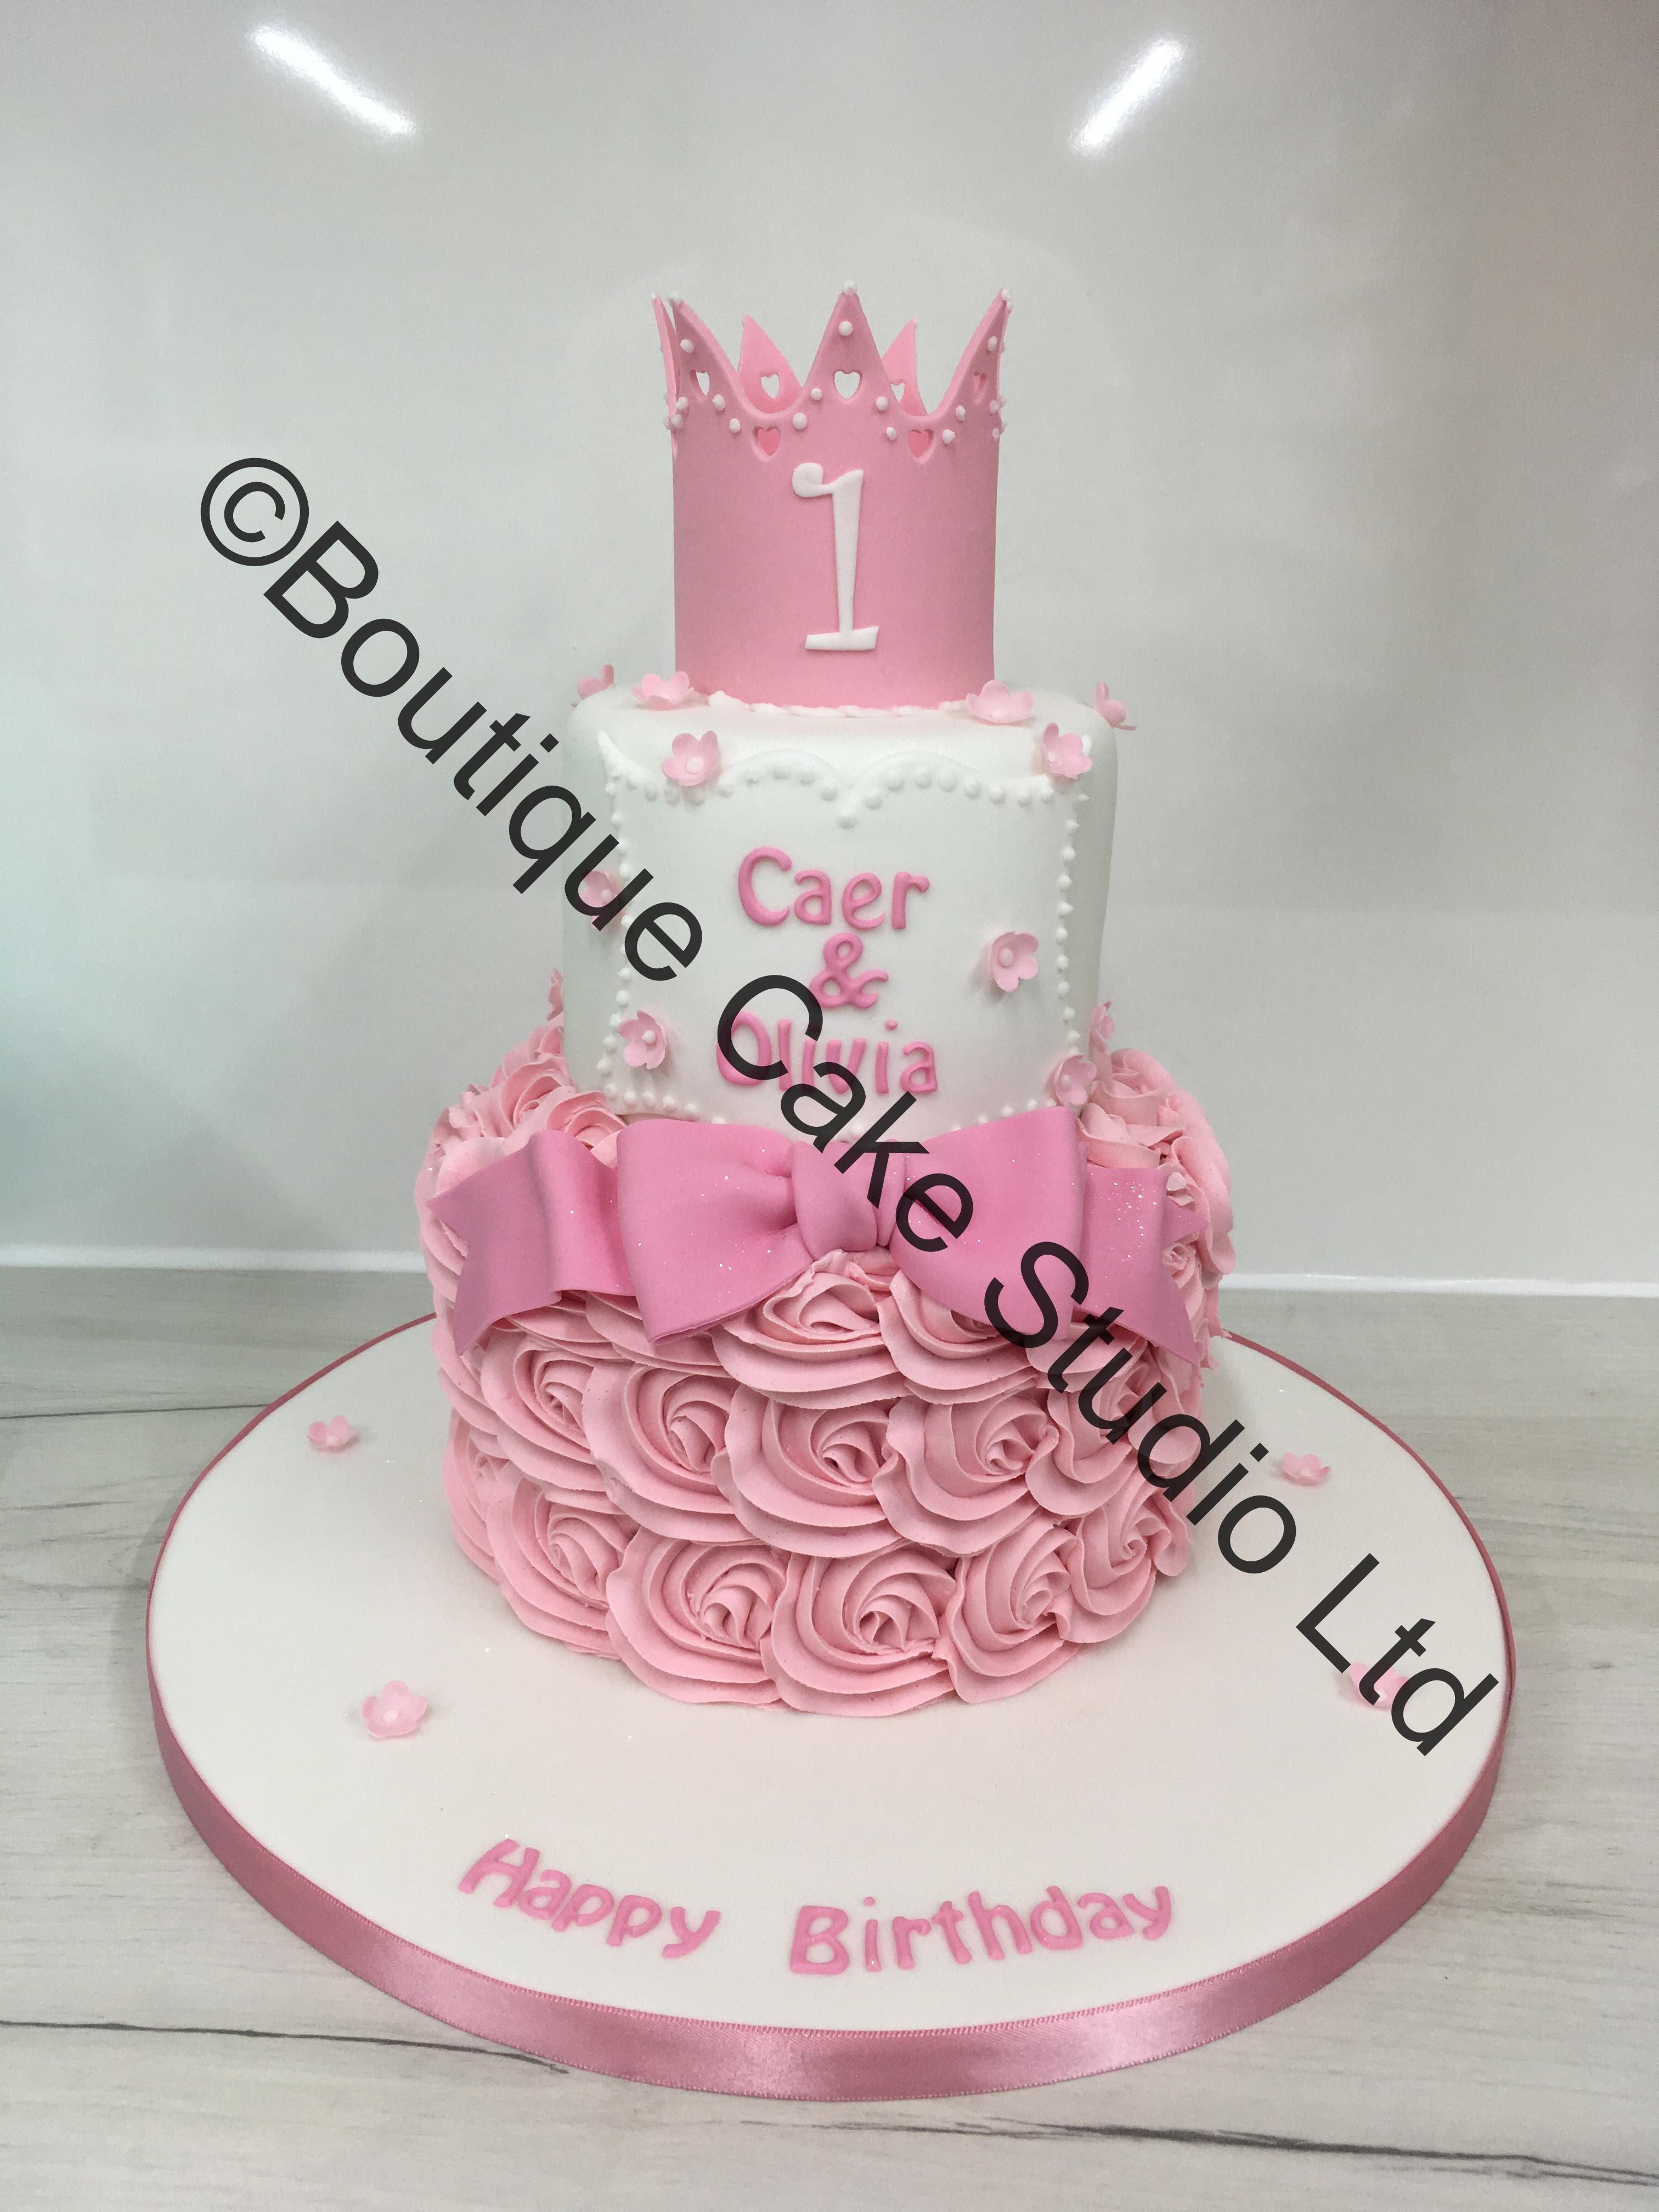 Buttercream Crown Cake with large bow